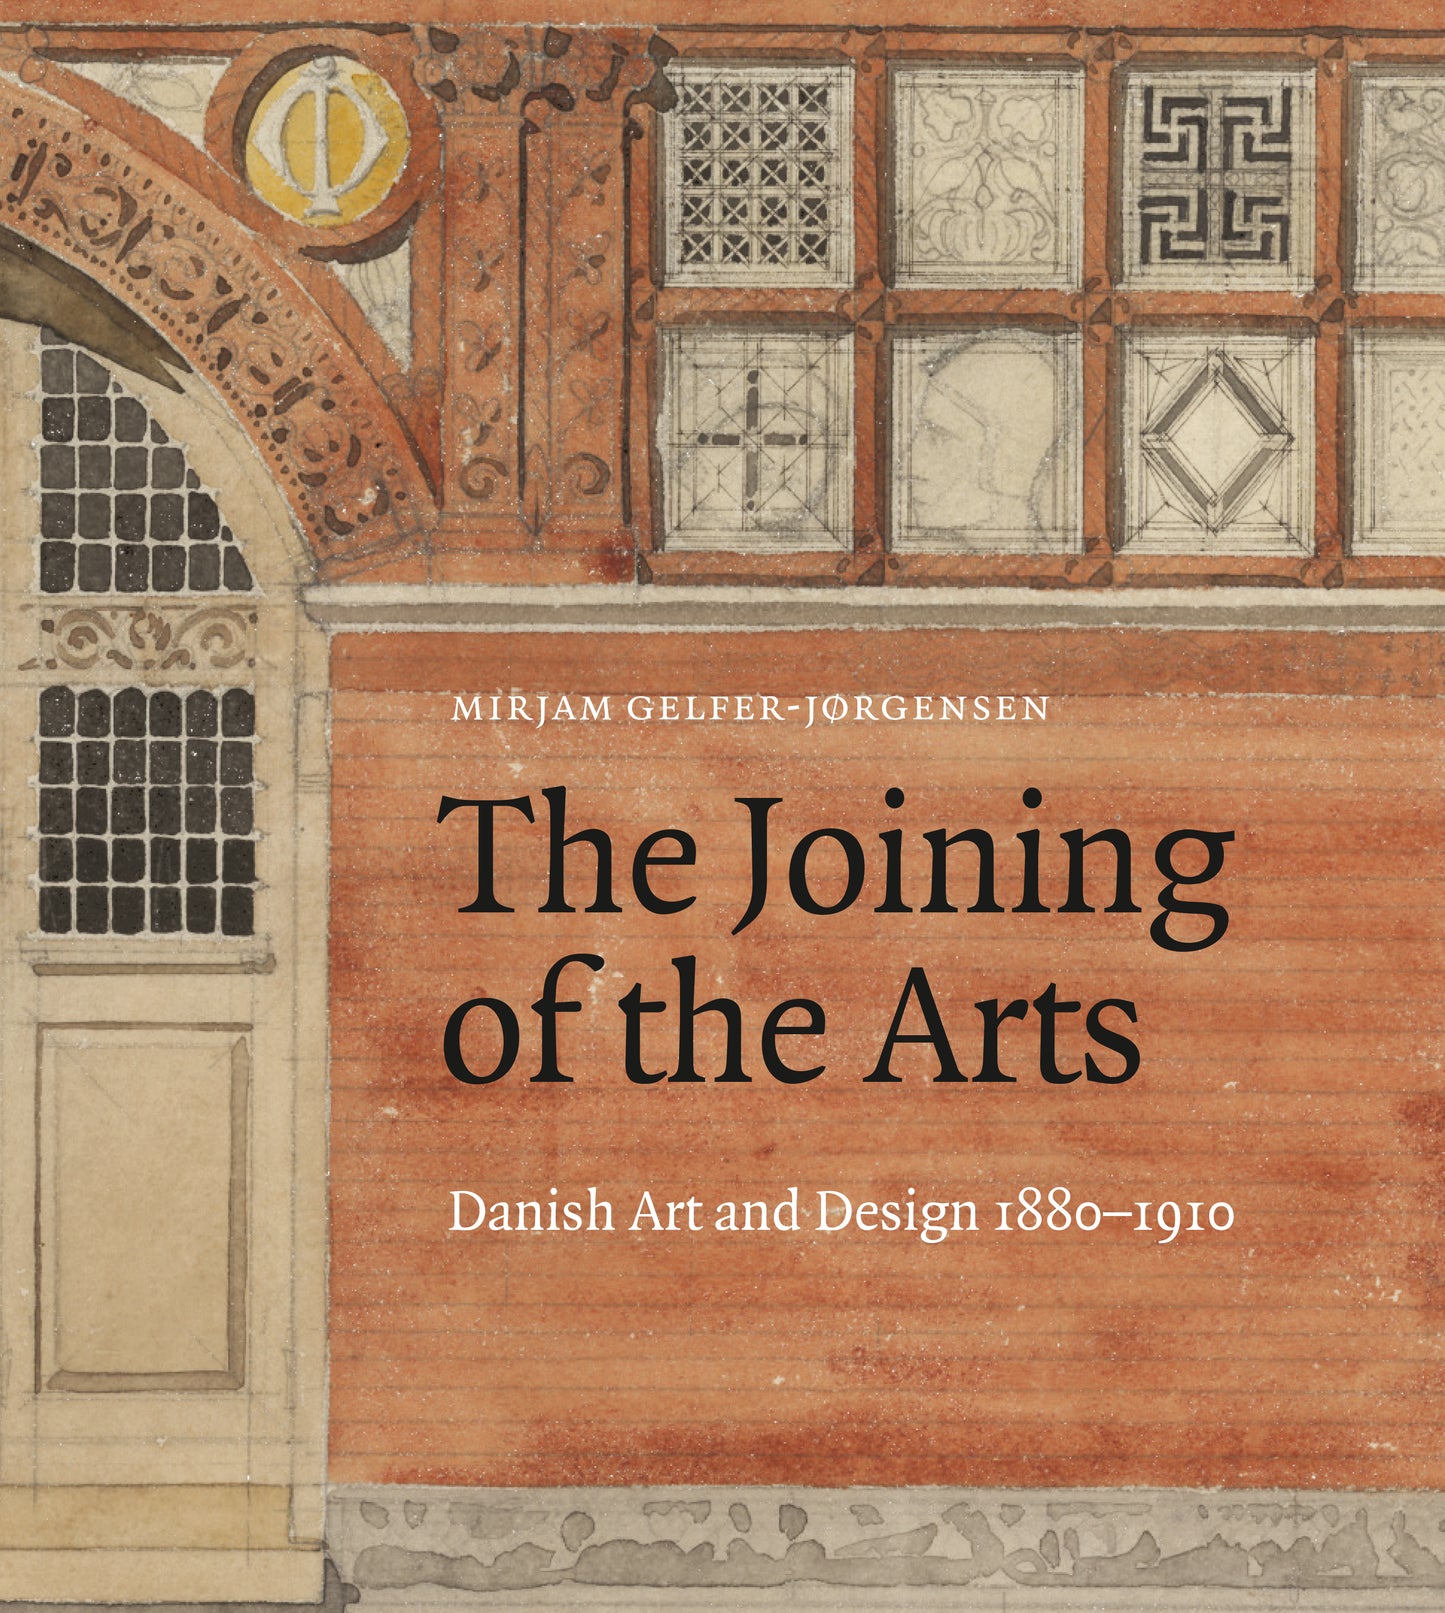 The Joining of the Arts – Danish Art and Design 1880-1910